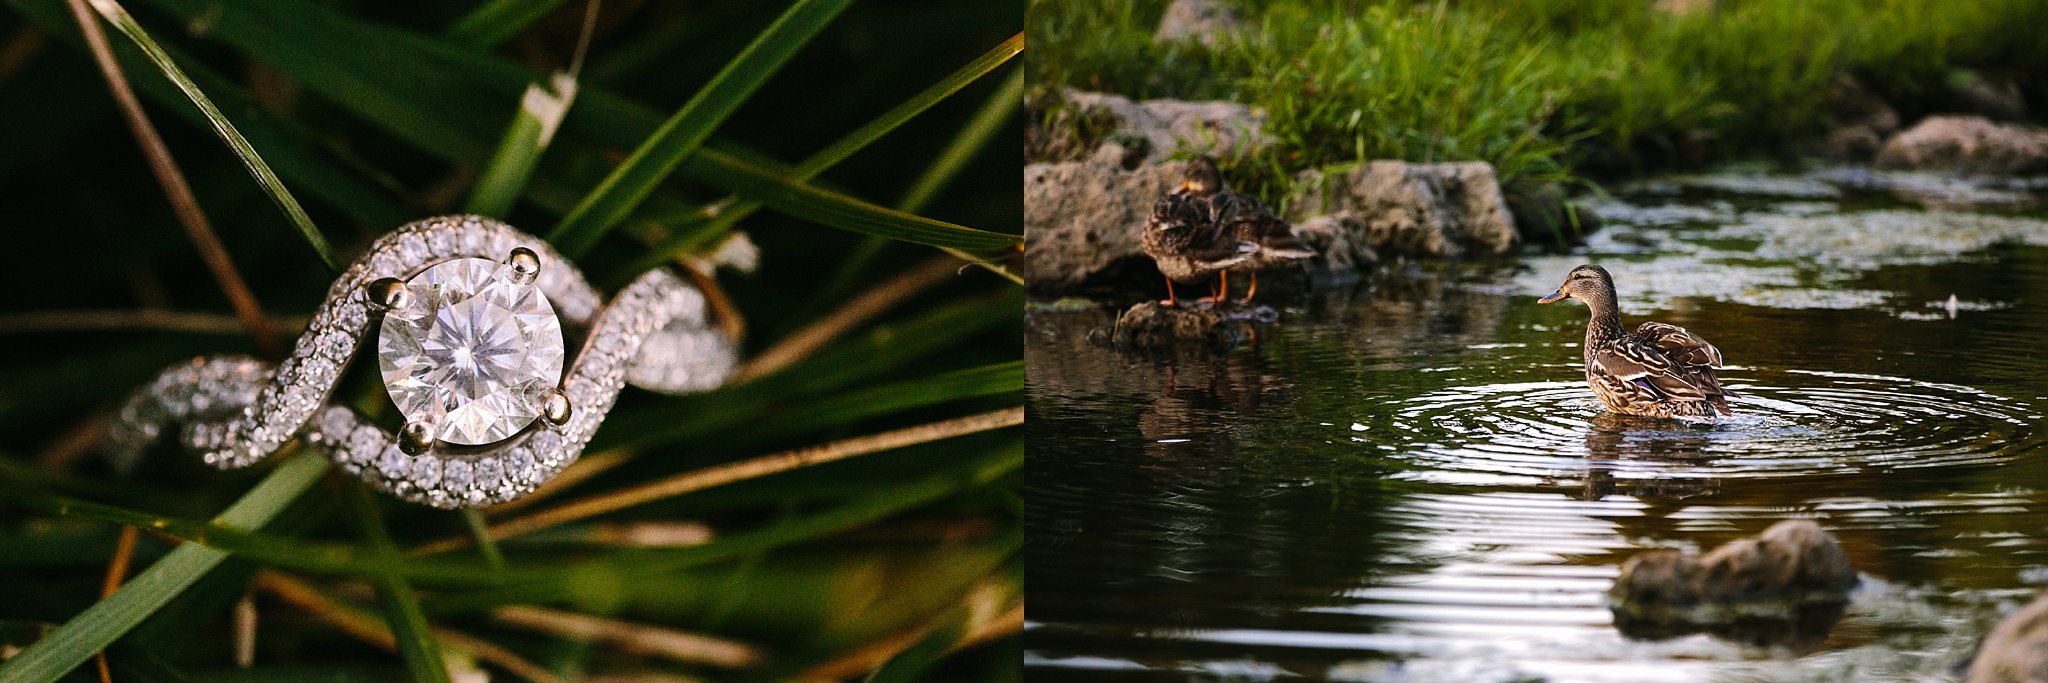 outdoor dubuque engagement session by catherine furlin photography, engagement ring, ducks in asbury pond